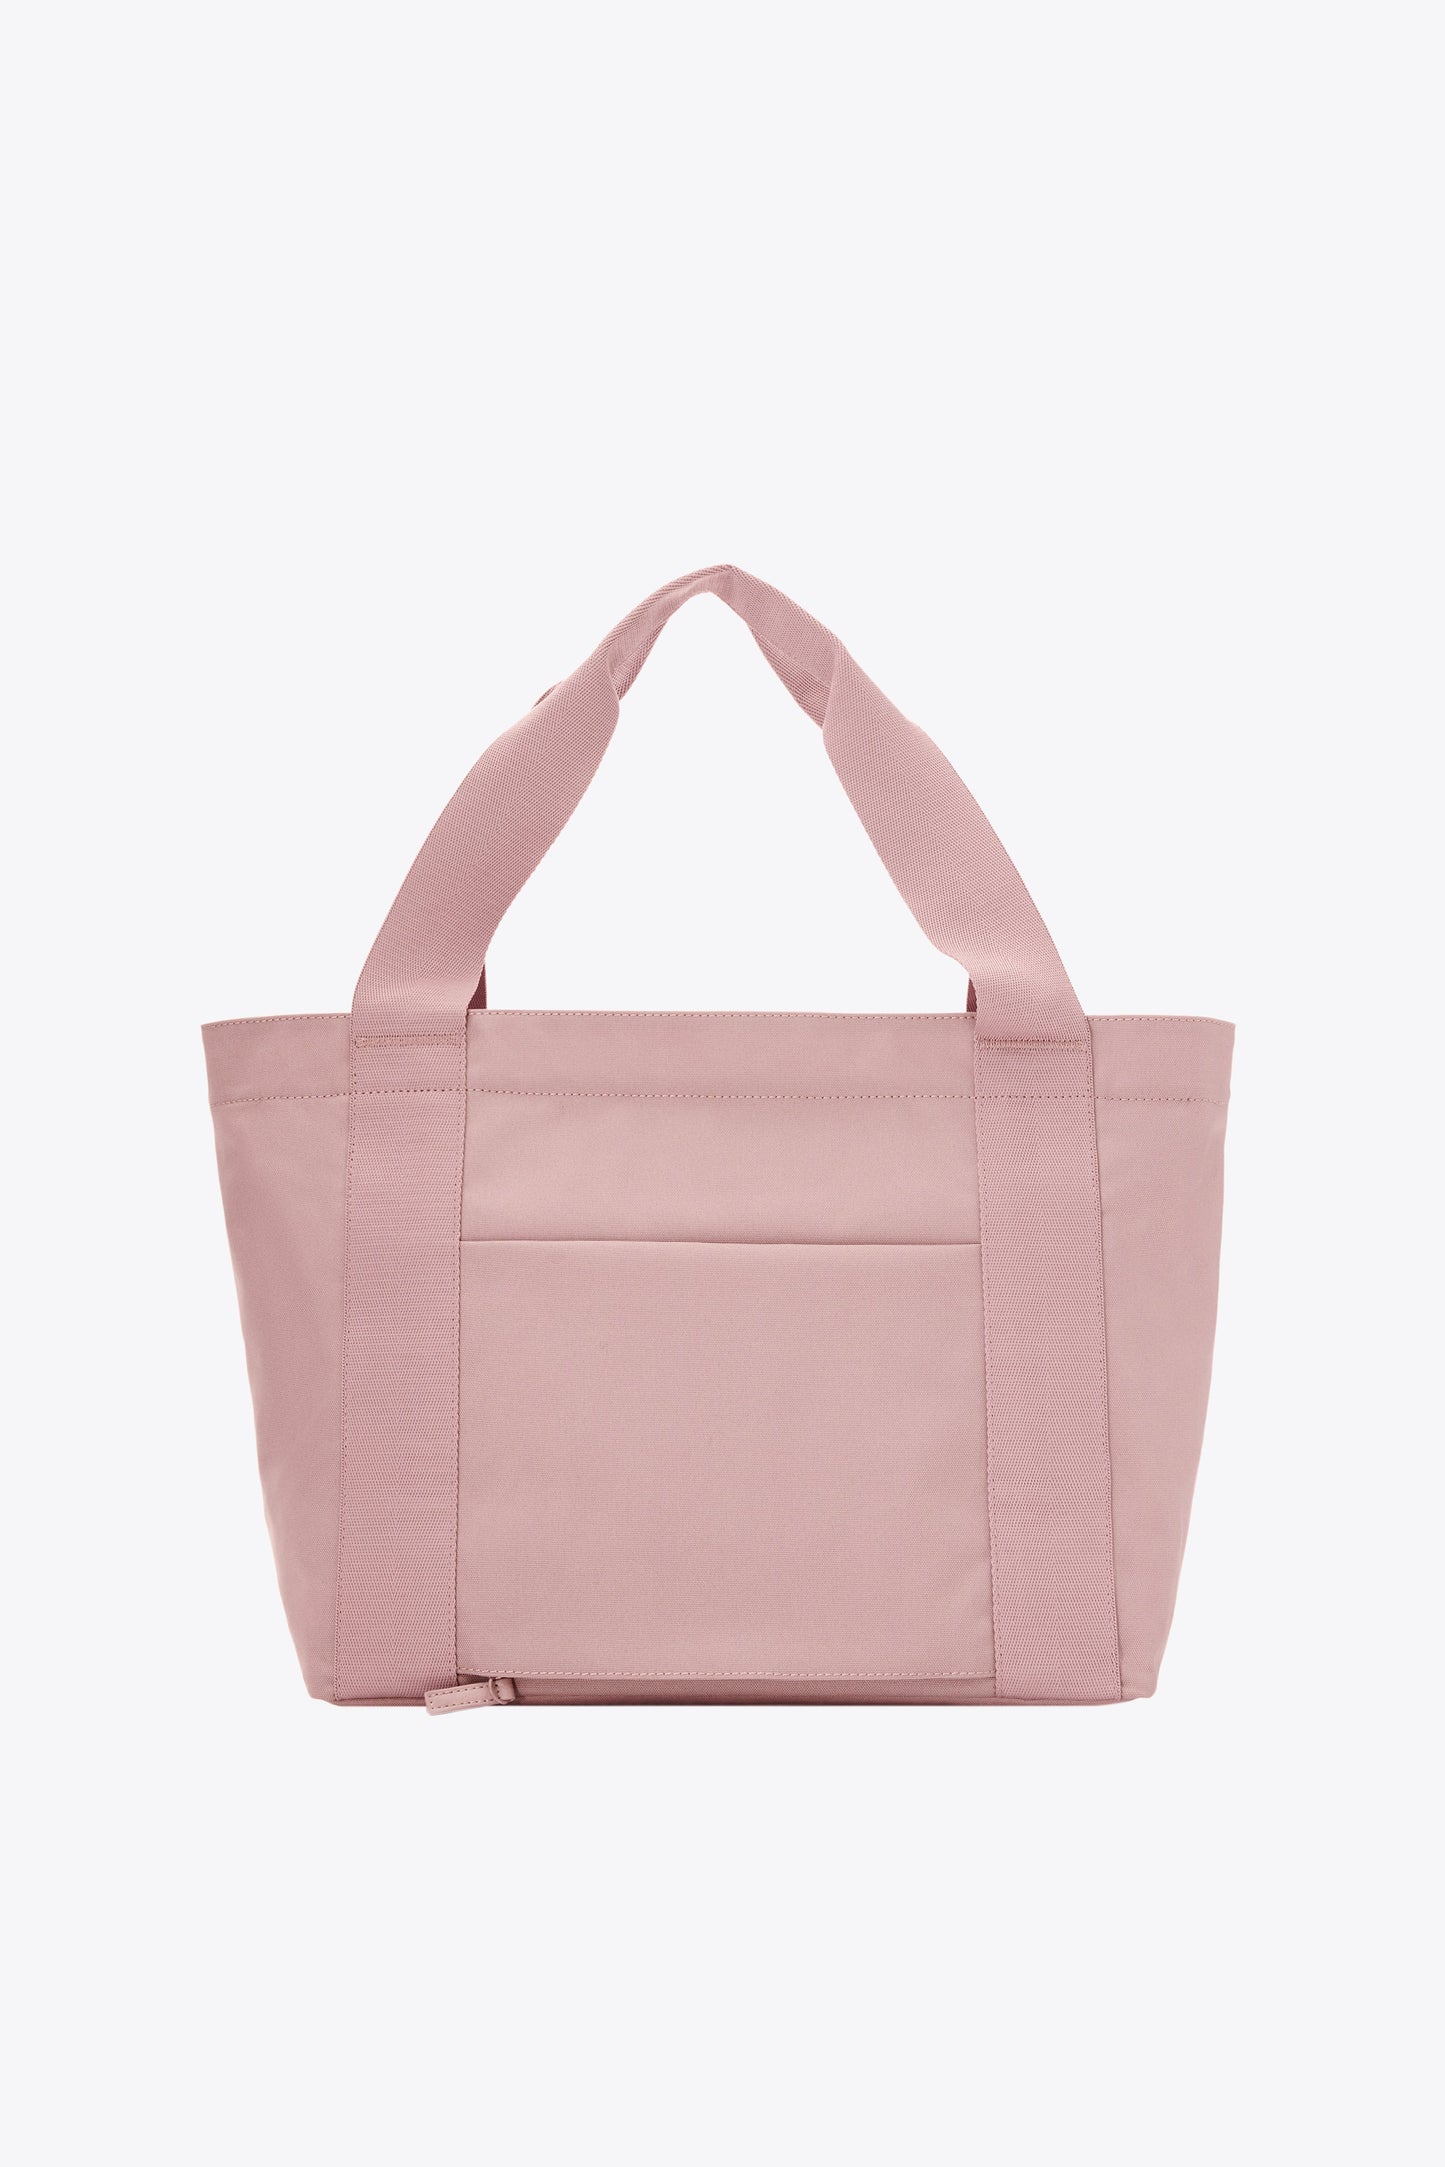 The BÉISics Tote in Atlas Pink